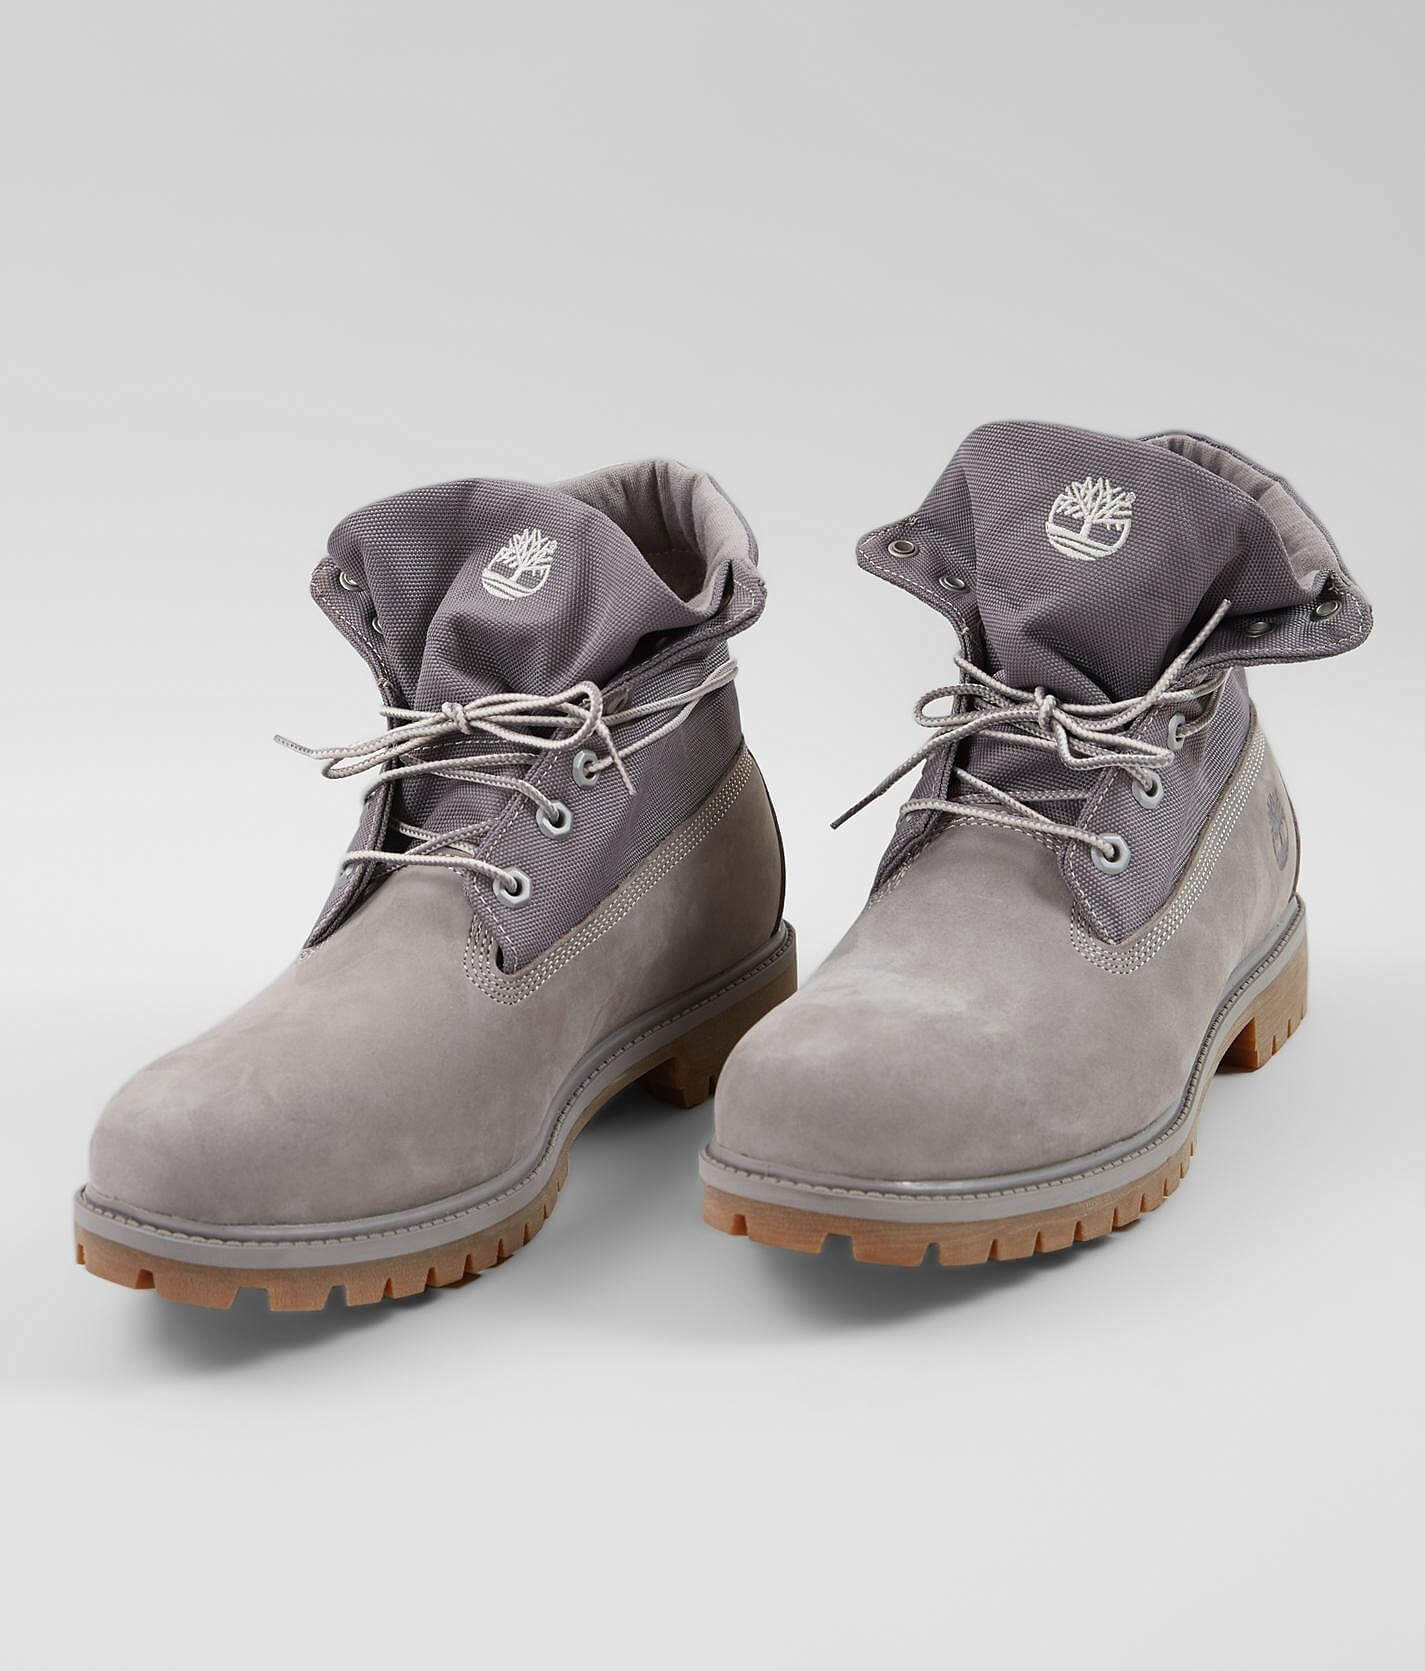 timberland roll down boots